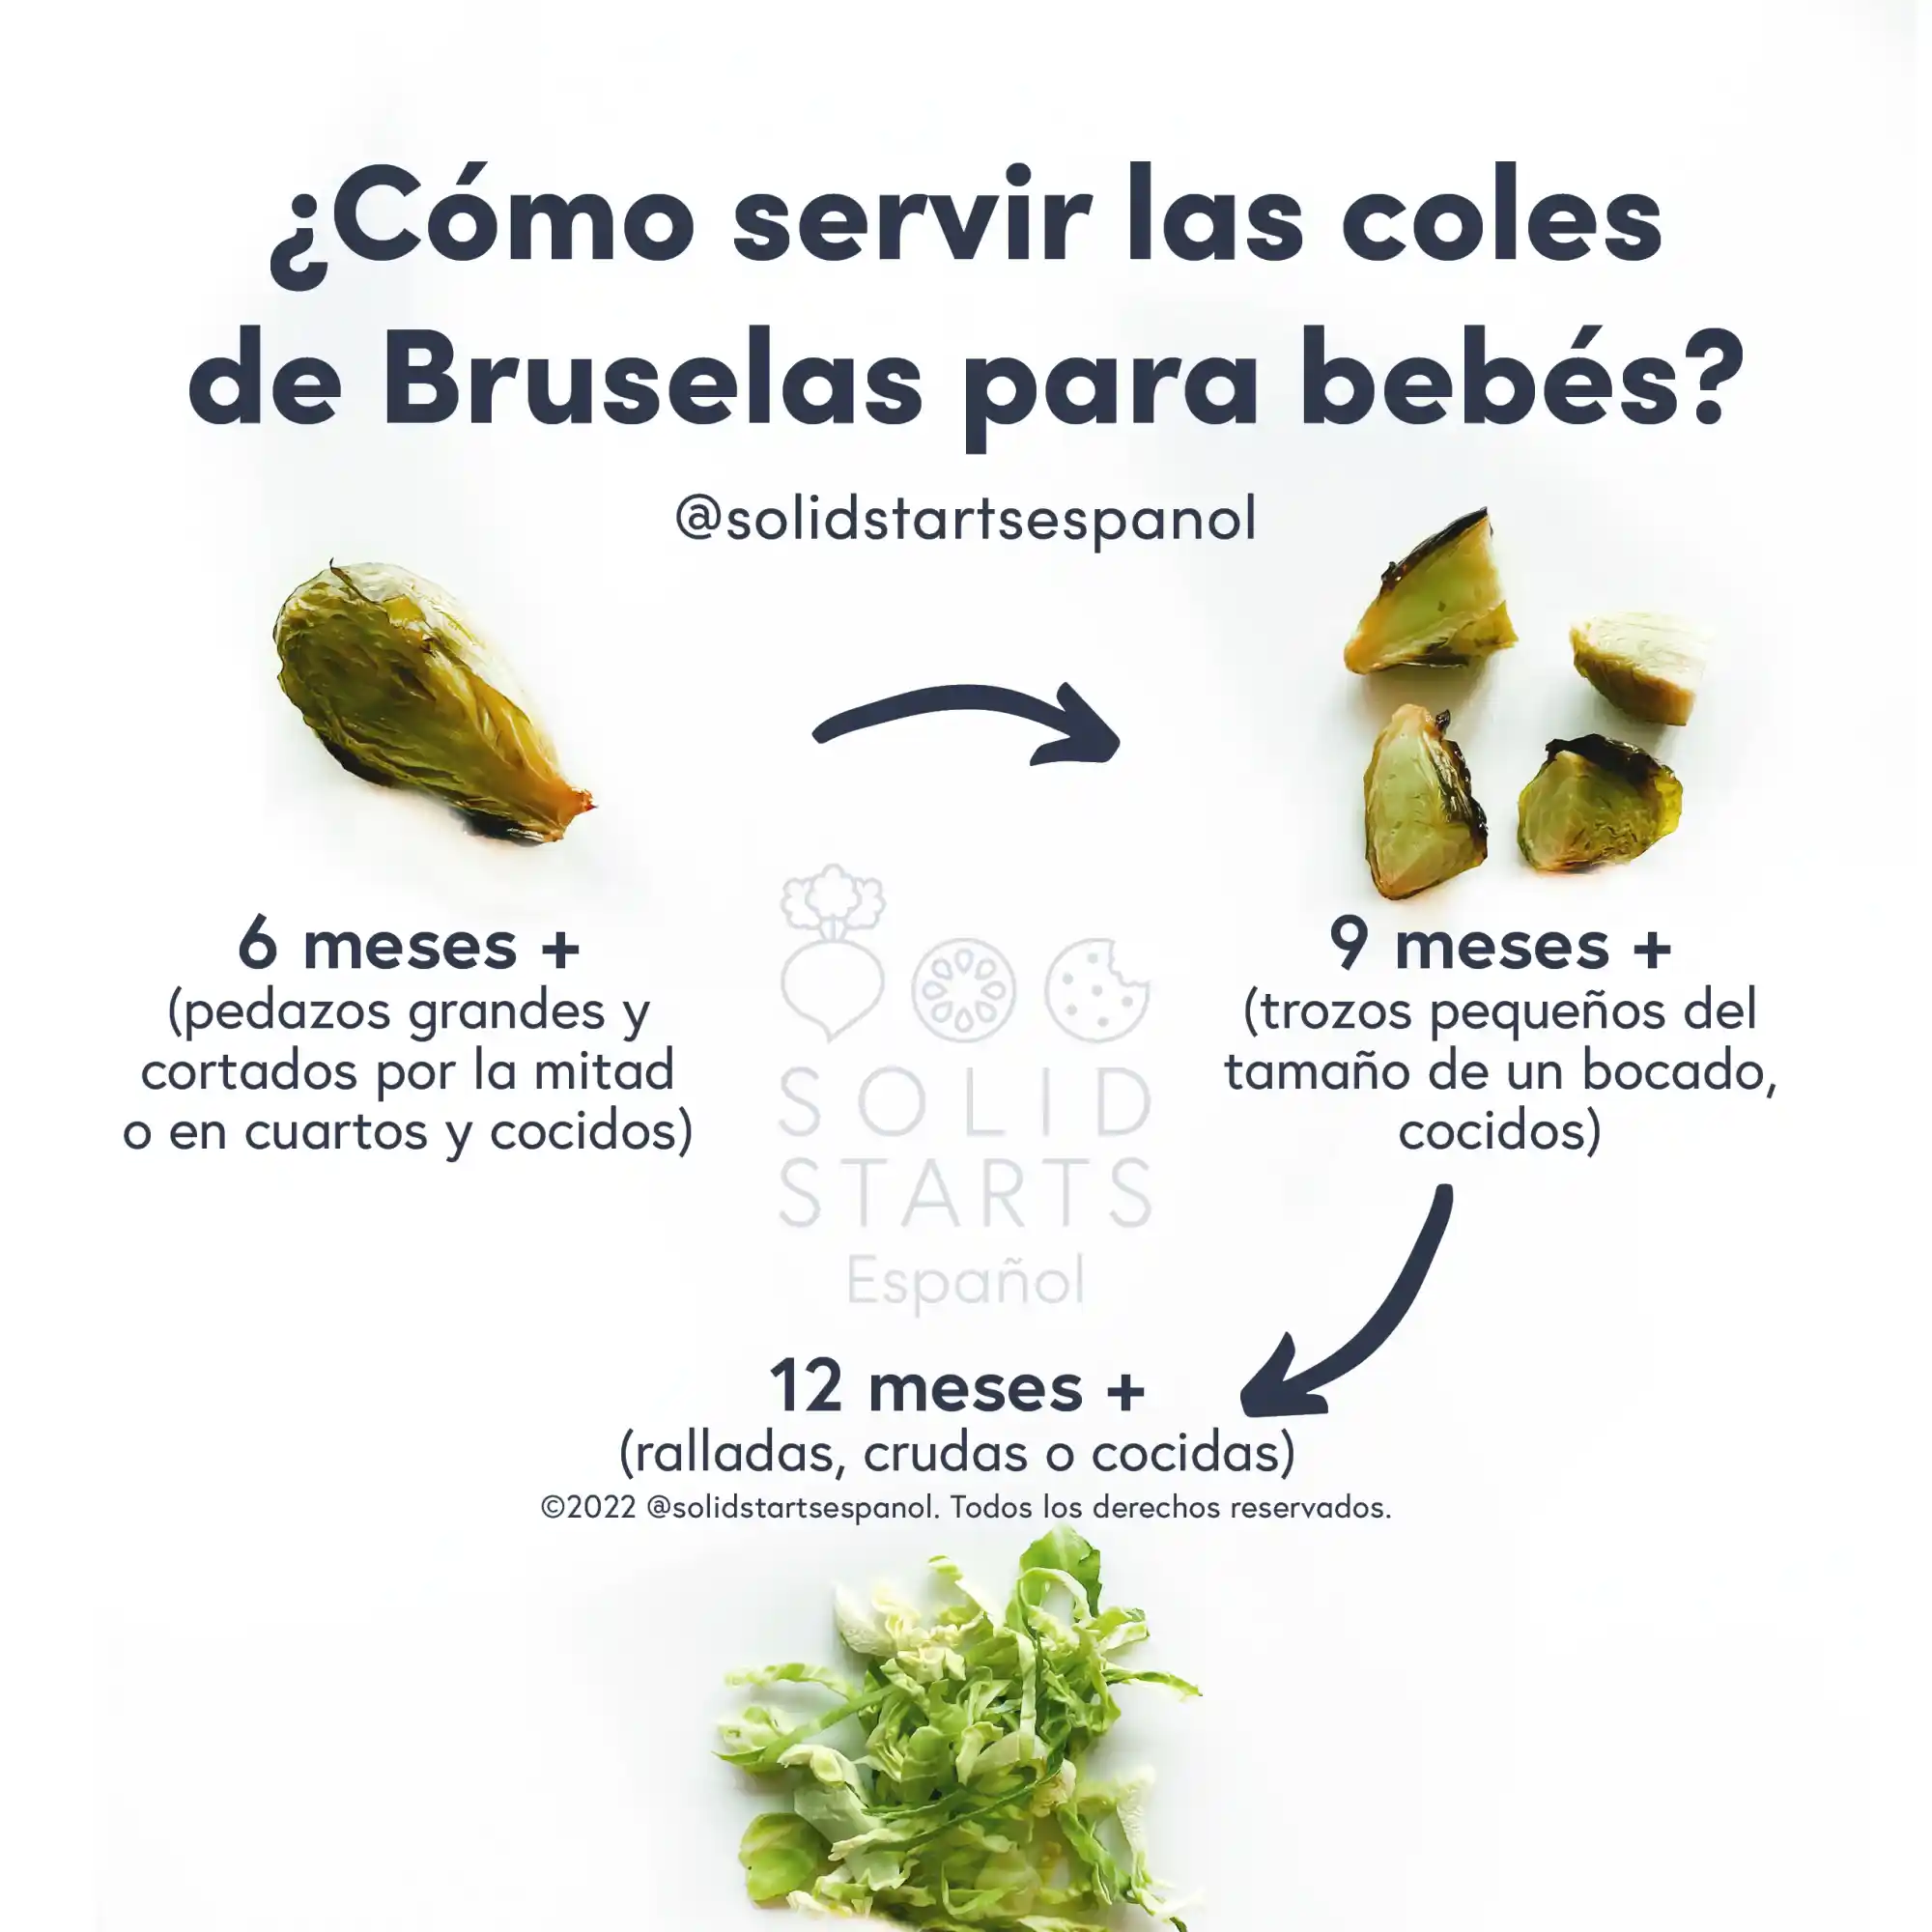 an infographic with the header How to Serve Brussels Sprouts to Babies: large cooked sprouts, halved or quartered for babies 6 months+, cooked bite-size pieces for 9 months+, shredded raw or cooked for 12 months+